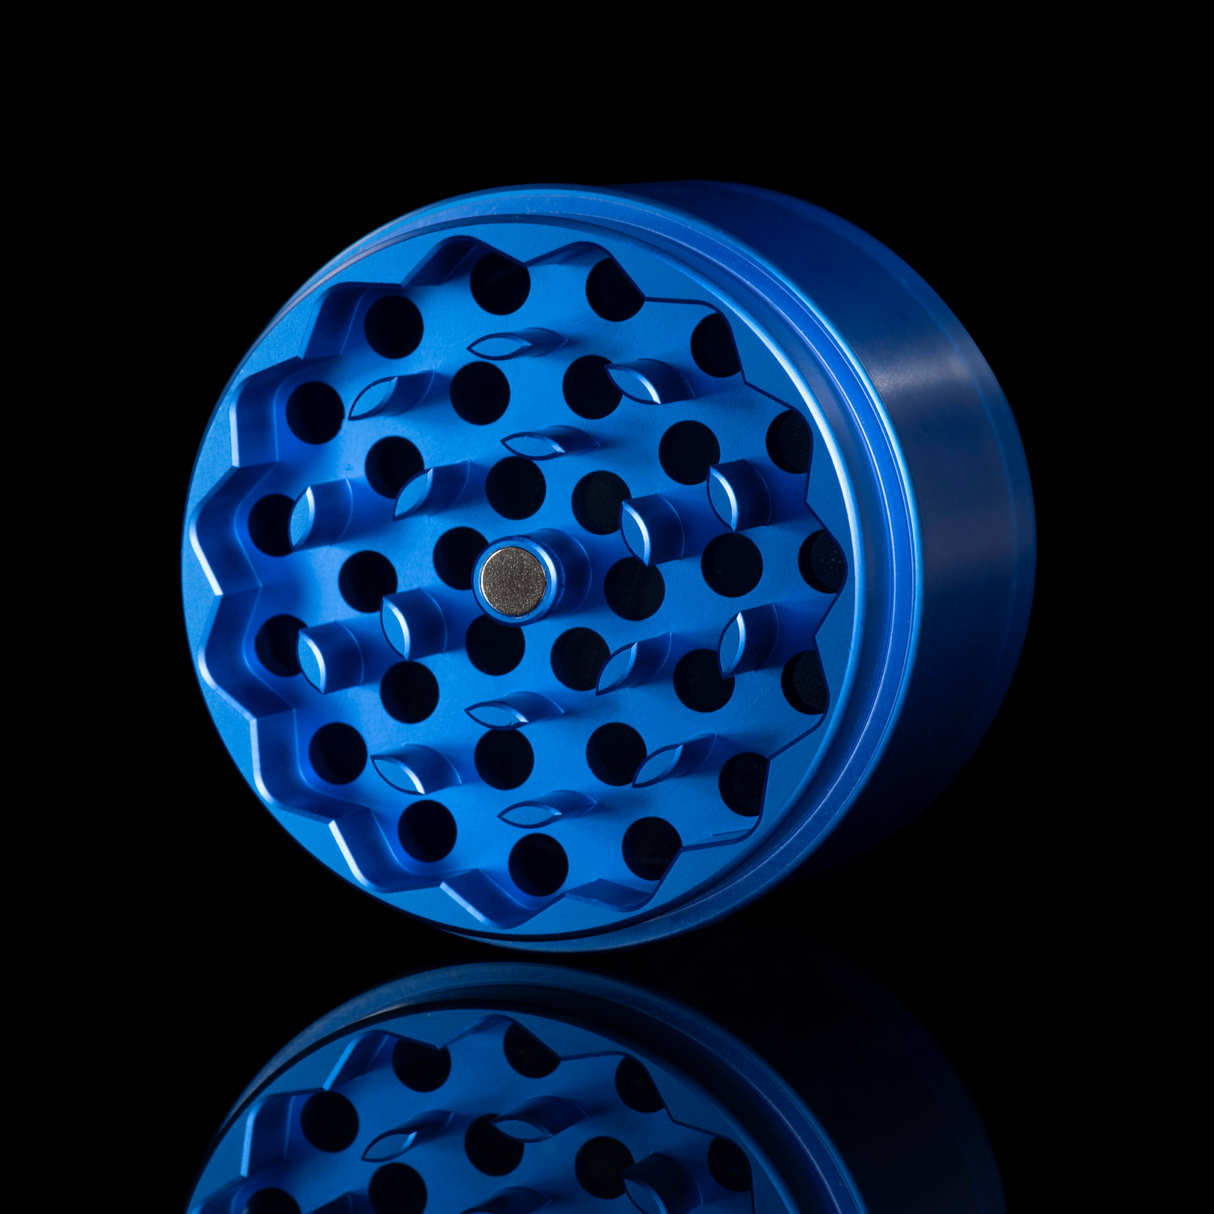 BLUEBUS 4 Piece 2.2" Aluminum Grinder in Blue, Magnetic, for Dry Herbs - Top View